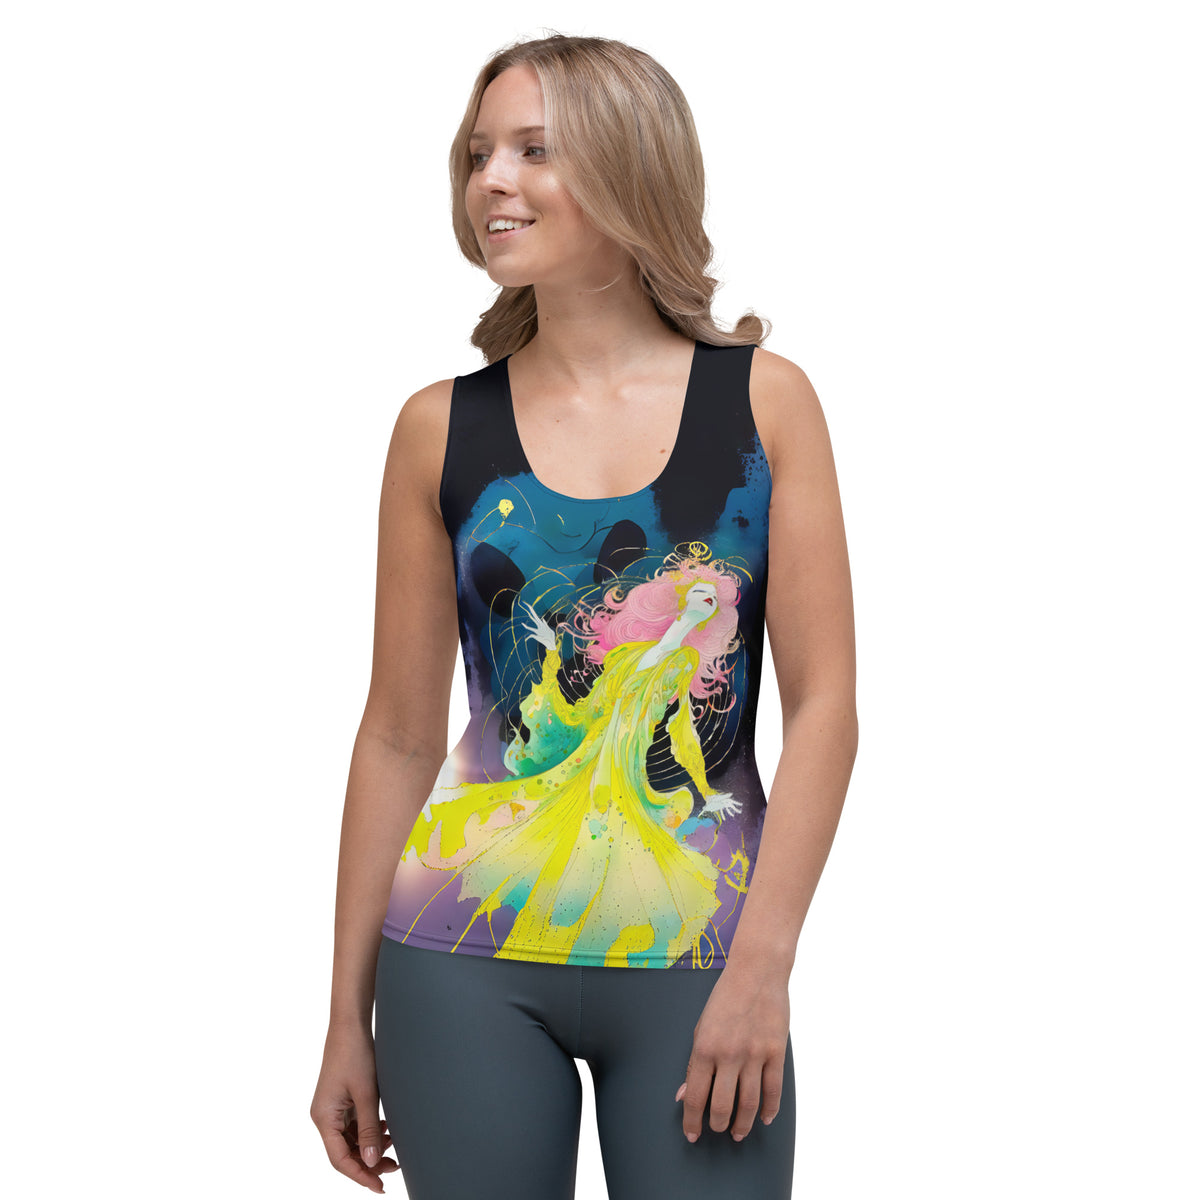 Botanical Bliss Women's Tank Top on a clothing mannequin.